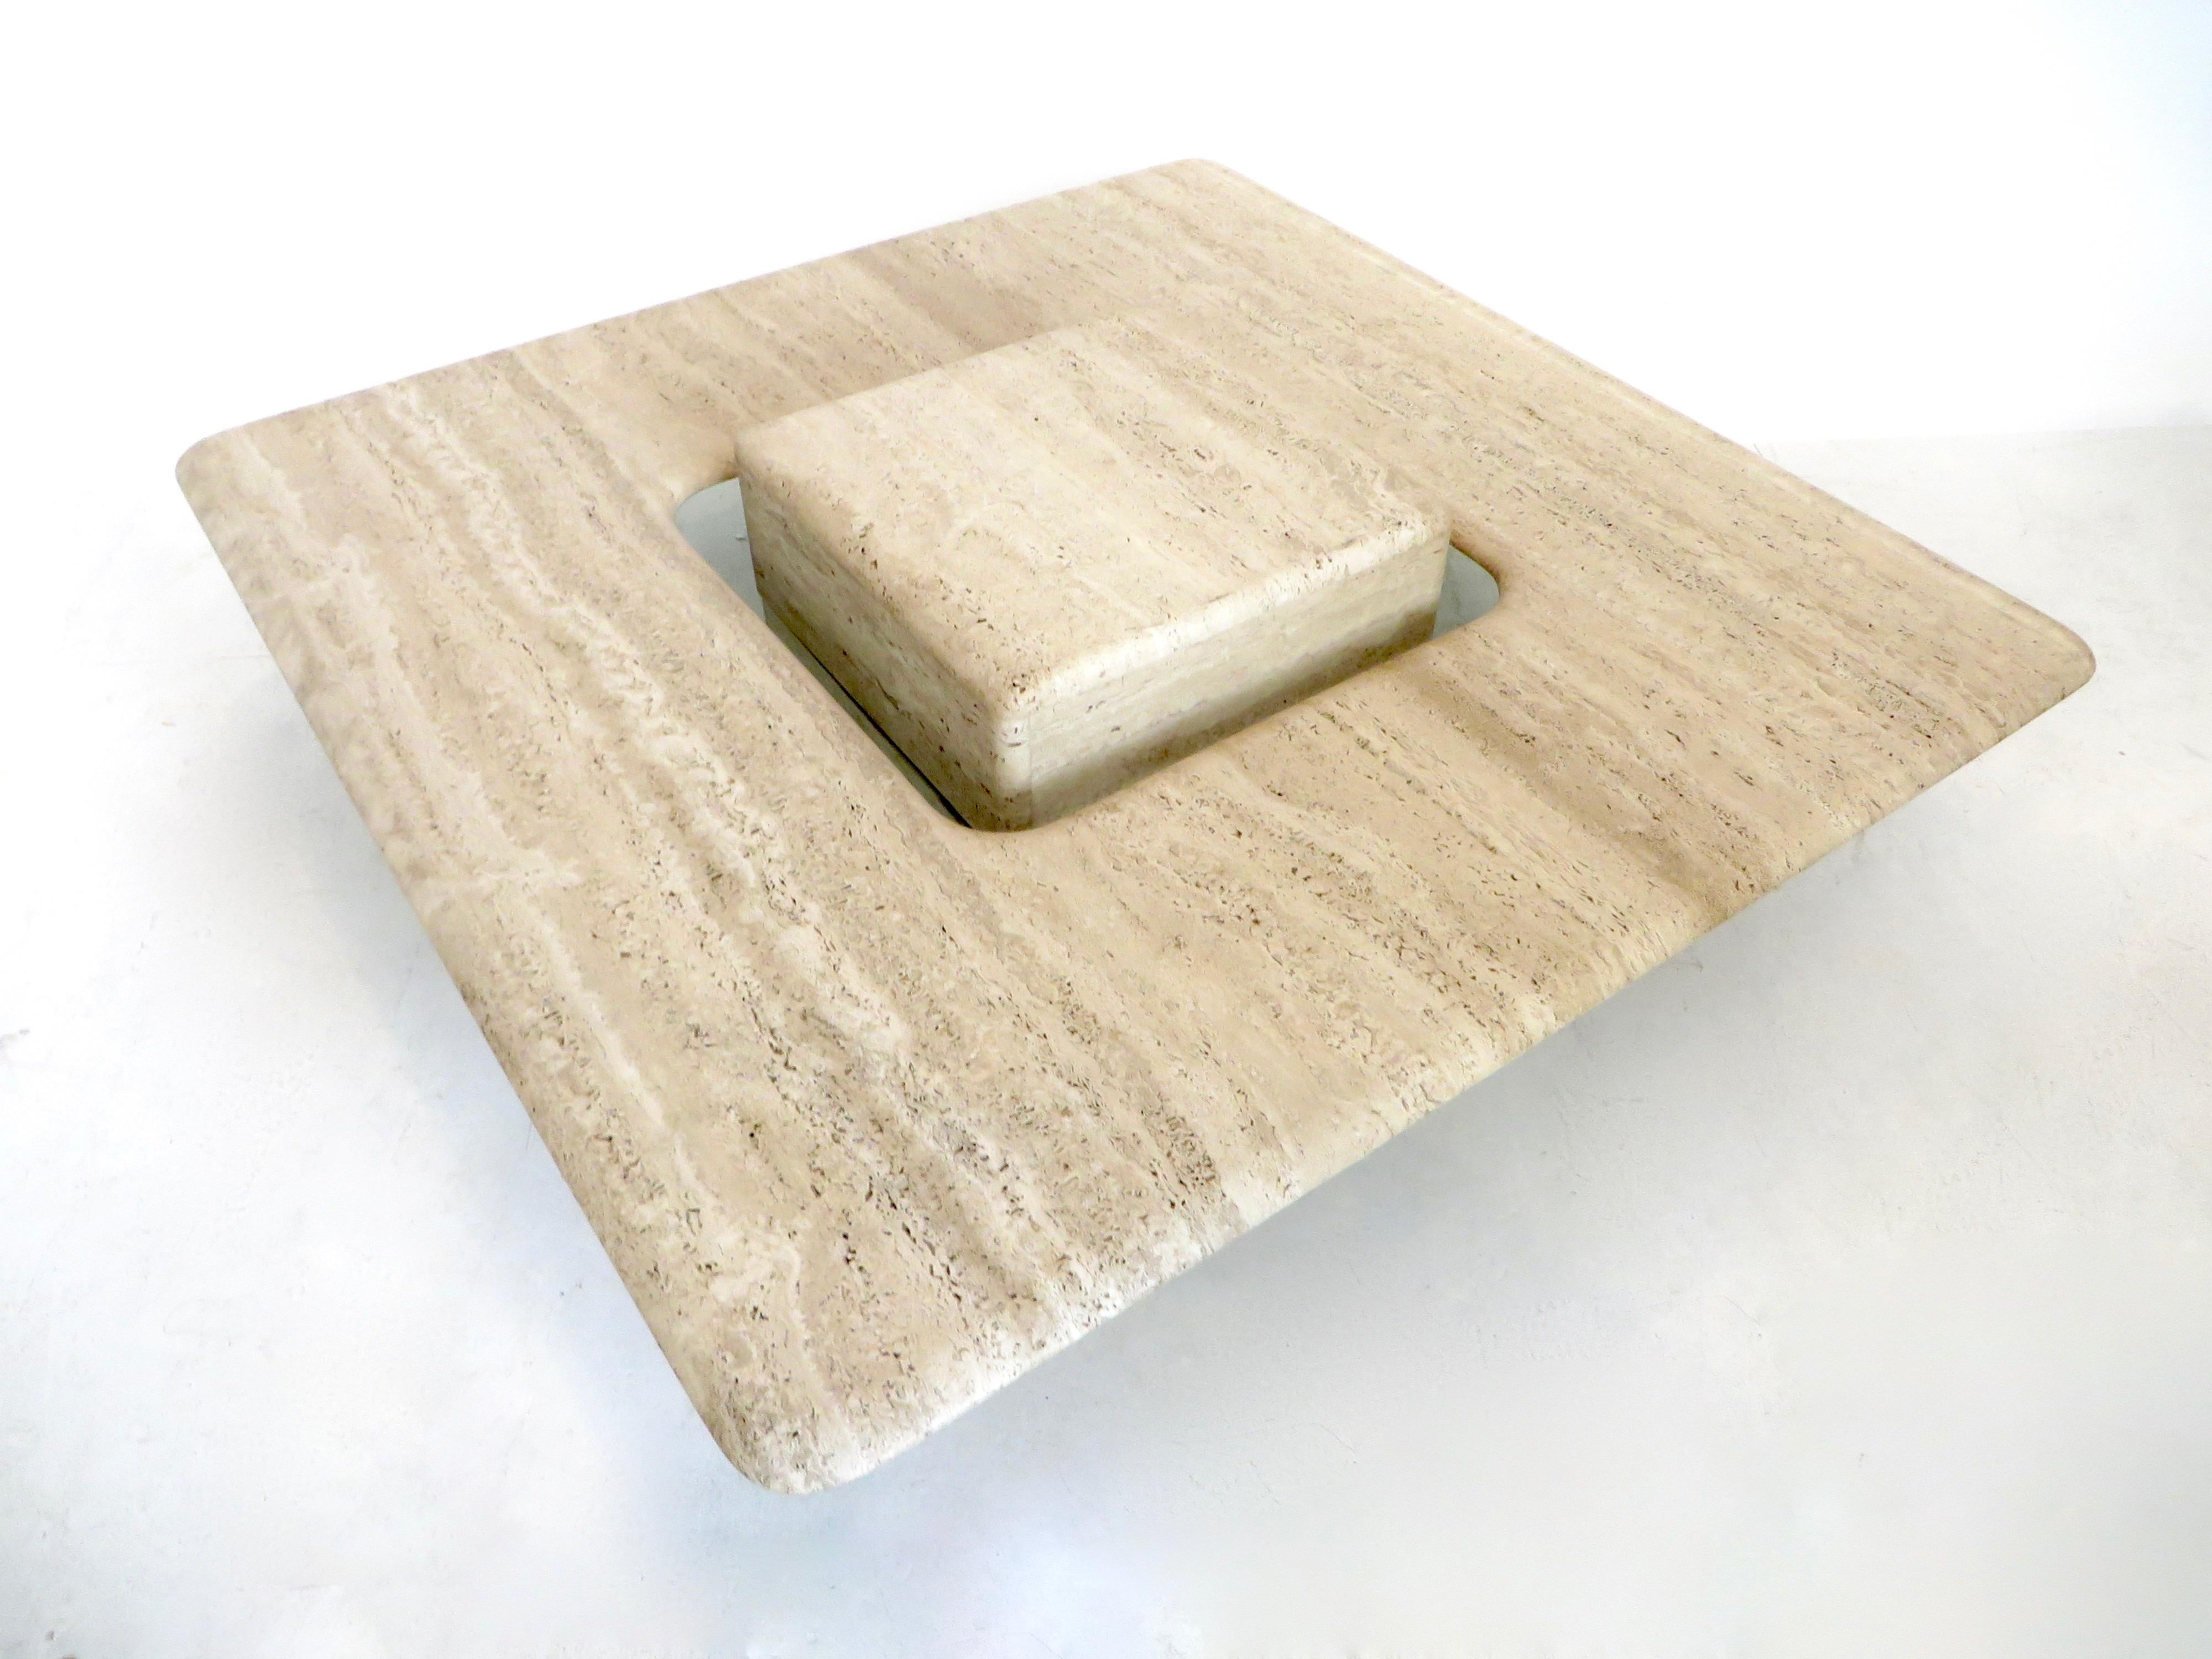 A Minimalist French, circa 1970 travertine marble coffee table.
Italian honed matte and natural travertine marble low square coffee table with a floating cube in the center that is elevated by a piece of glass that is semi noticeable. The cube then